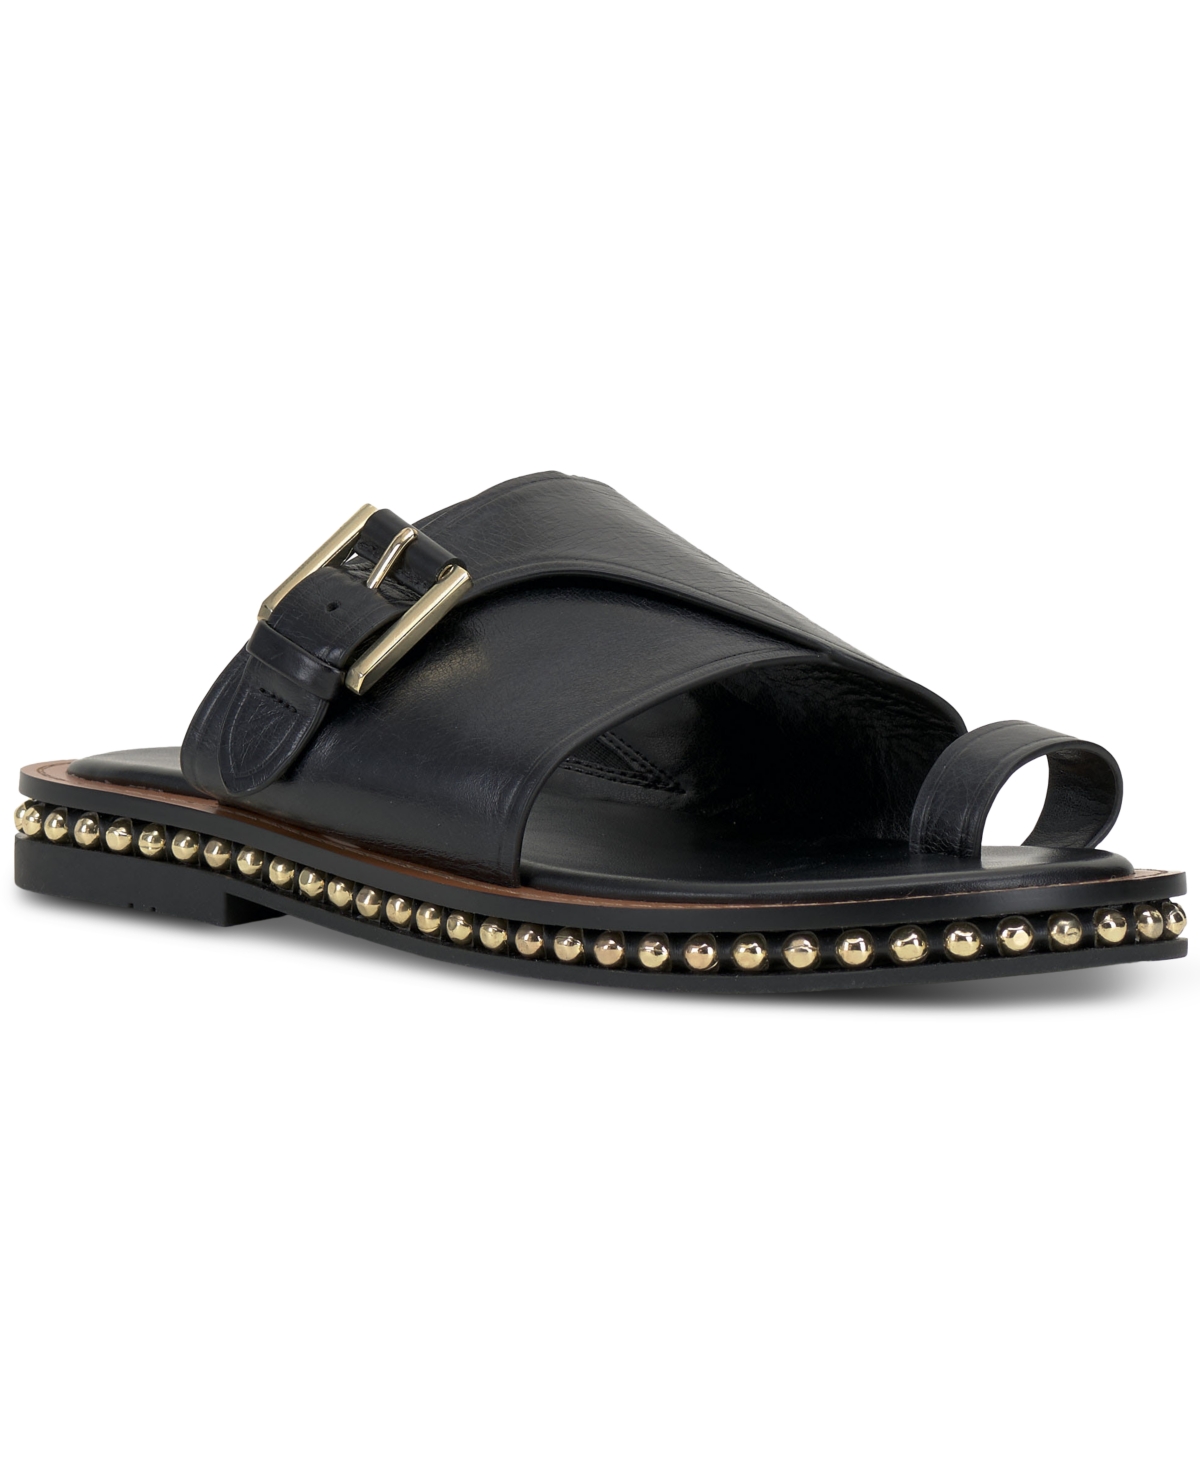 UPC 196672387409 product image for Vince Camuto Women's Cooliann Hooded Thong Flat Sandals Women's Shoes | upcitemdb.com